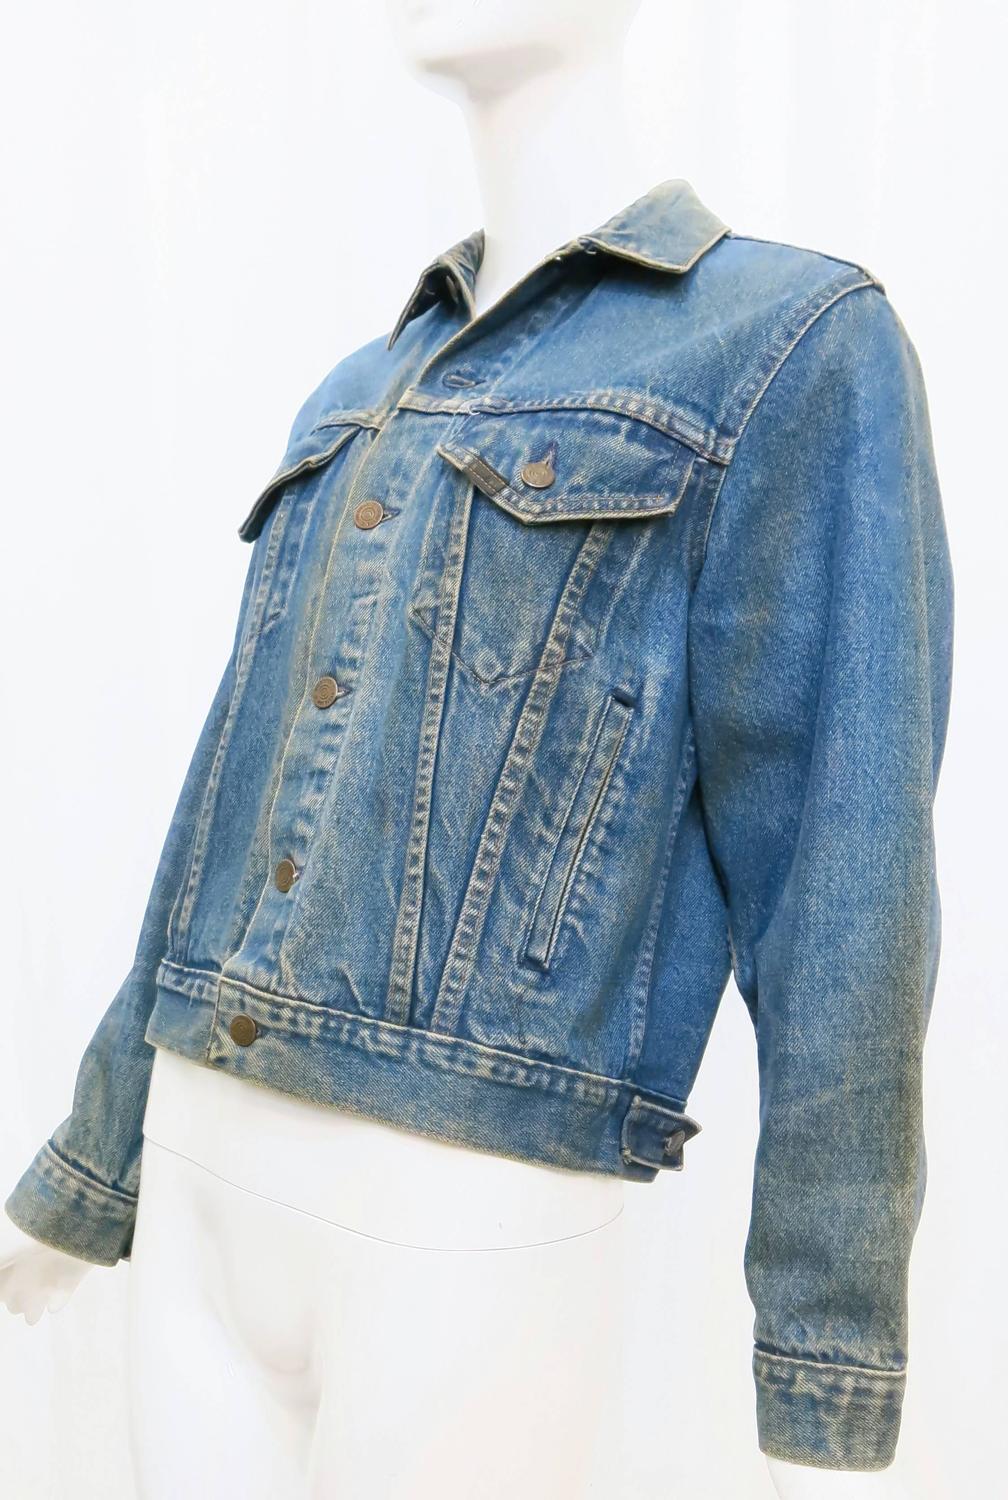 1970s Sears Roebuck and Co. Led Zeppelin Denim Jacket at 1stdibs